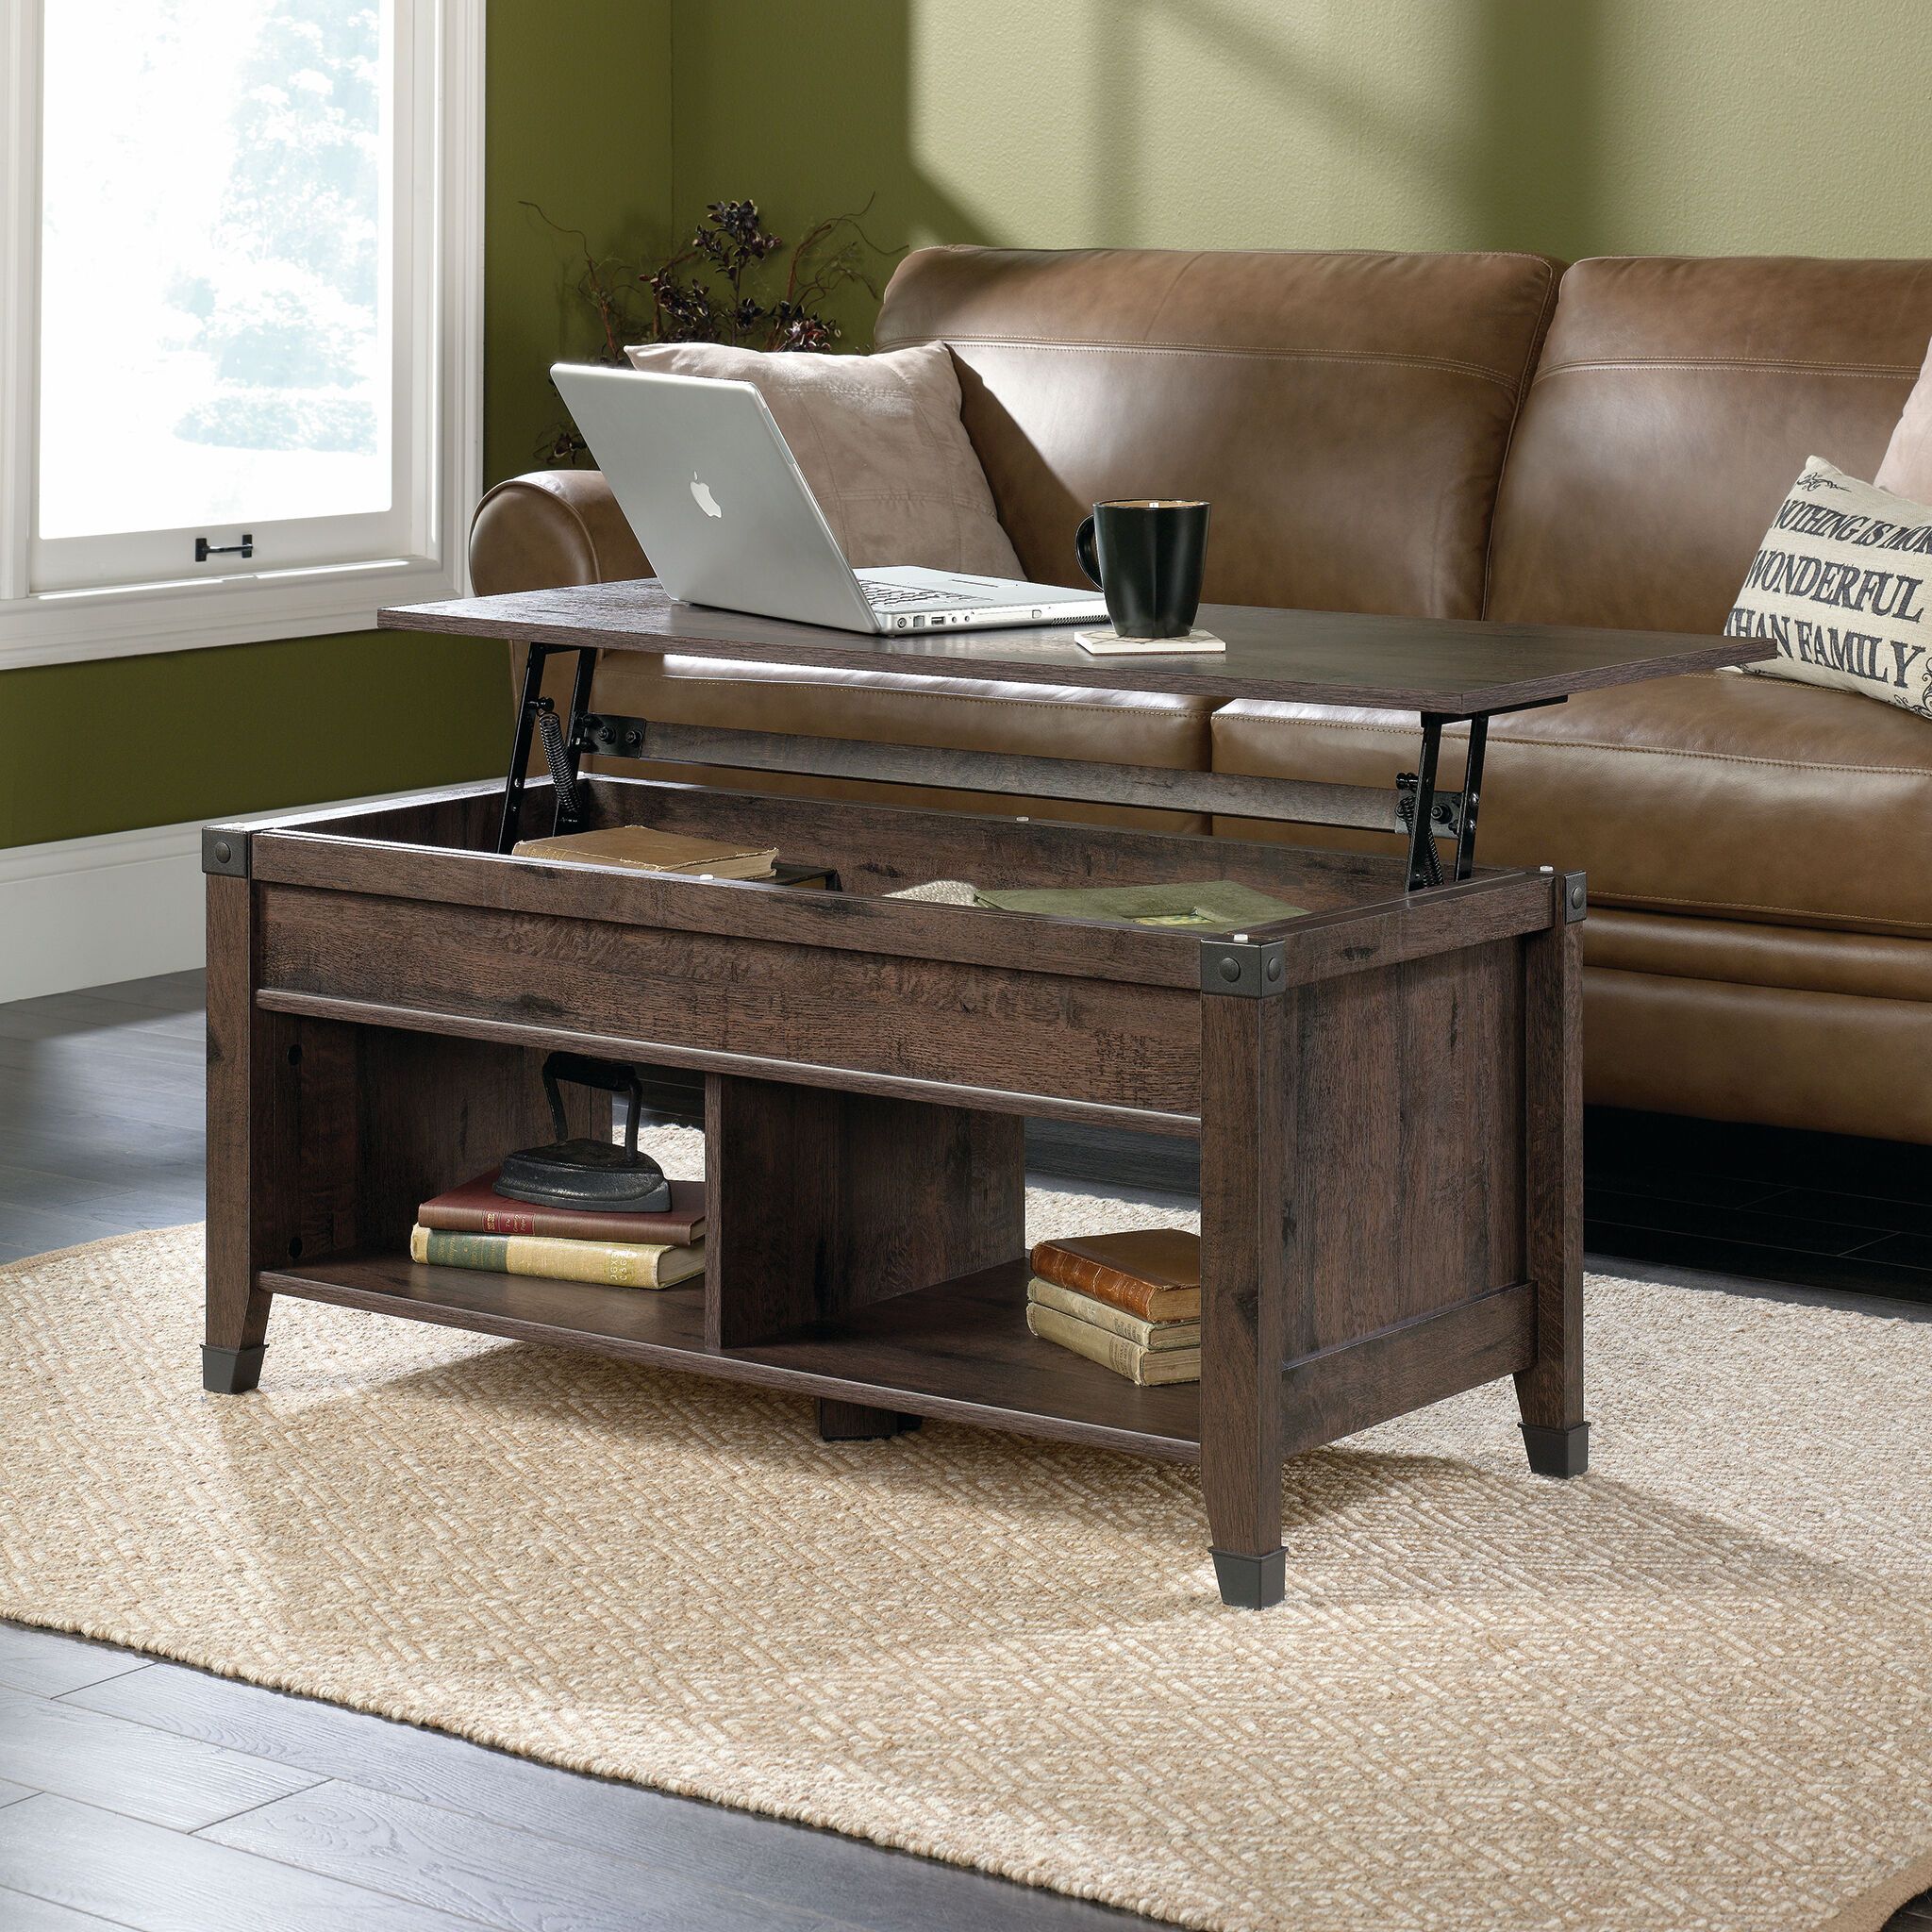 Rectangular Lift Top Contemporary Coffee Table In Coffee Oak | Mathis Regarding High Gloss Lift Top Coffee Tables (View 12 of 21)